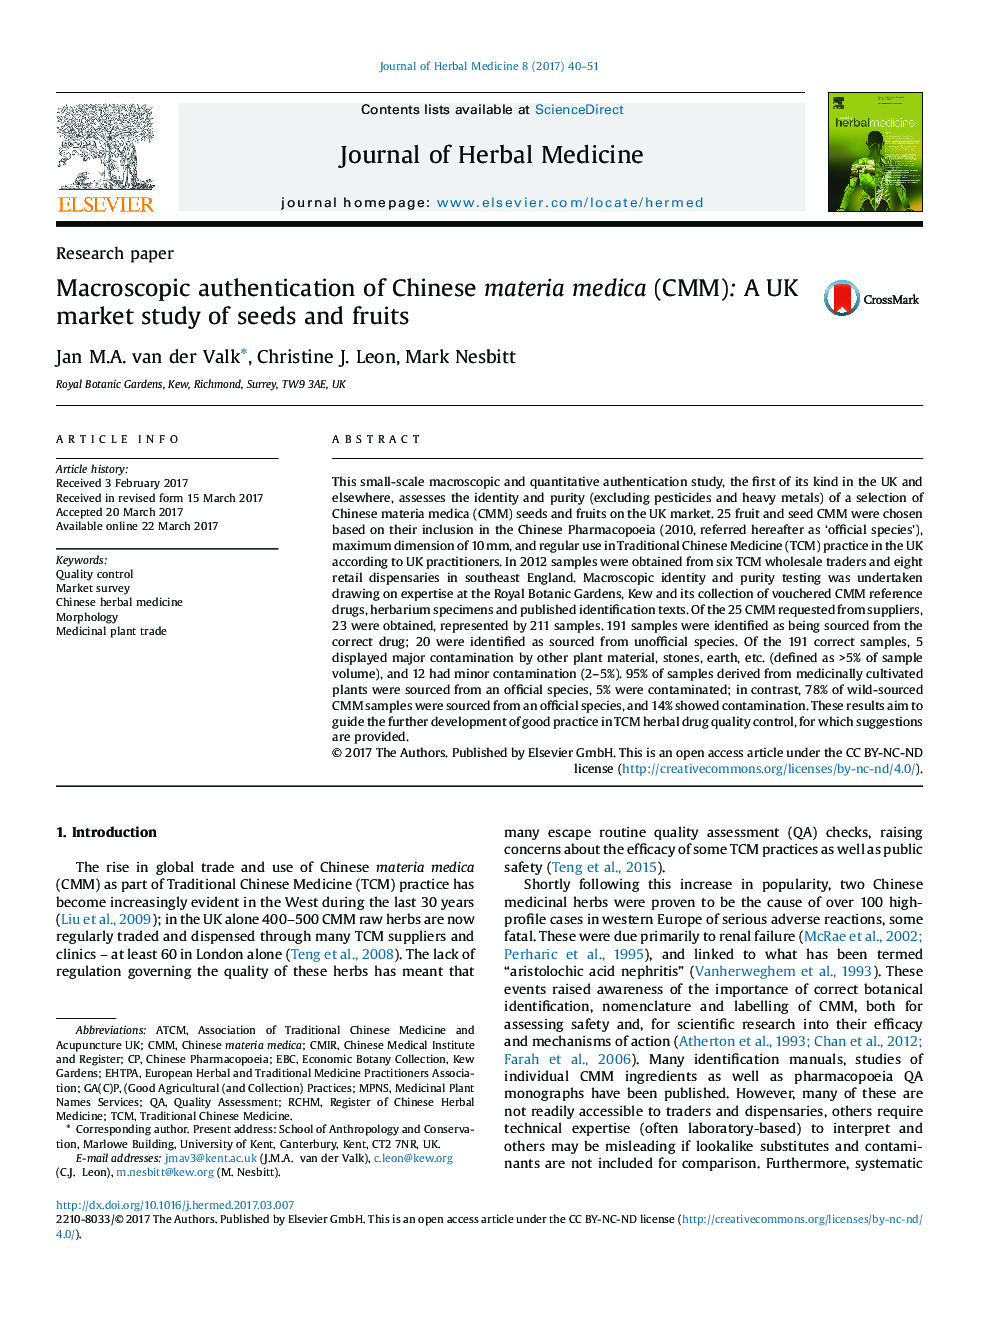 Macroscopic authentication of Chinese materia medica (CMM): A UK market study of seeds and fruits